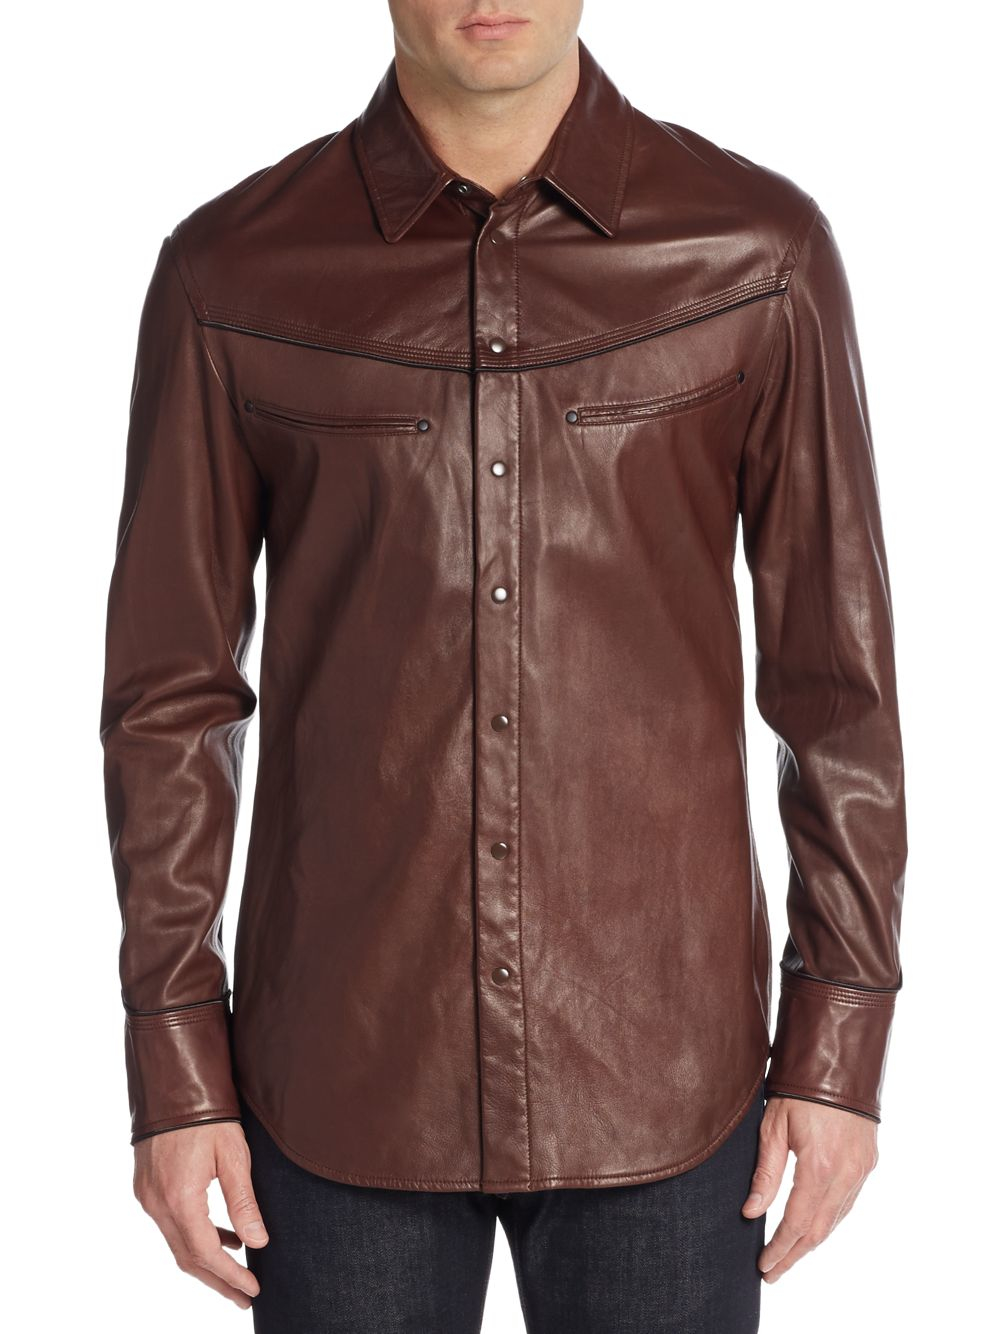 Lyst - 3.1 Phillip Lim Western Leather Shirt in Brown for Men